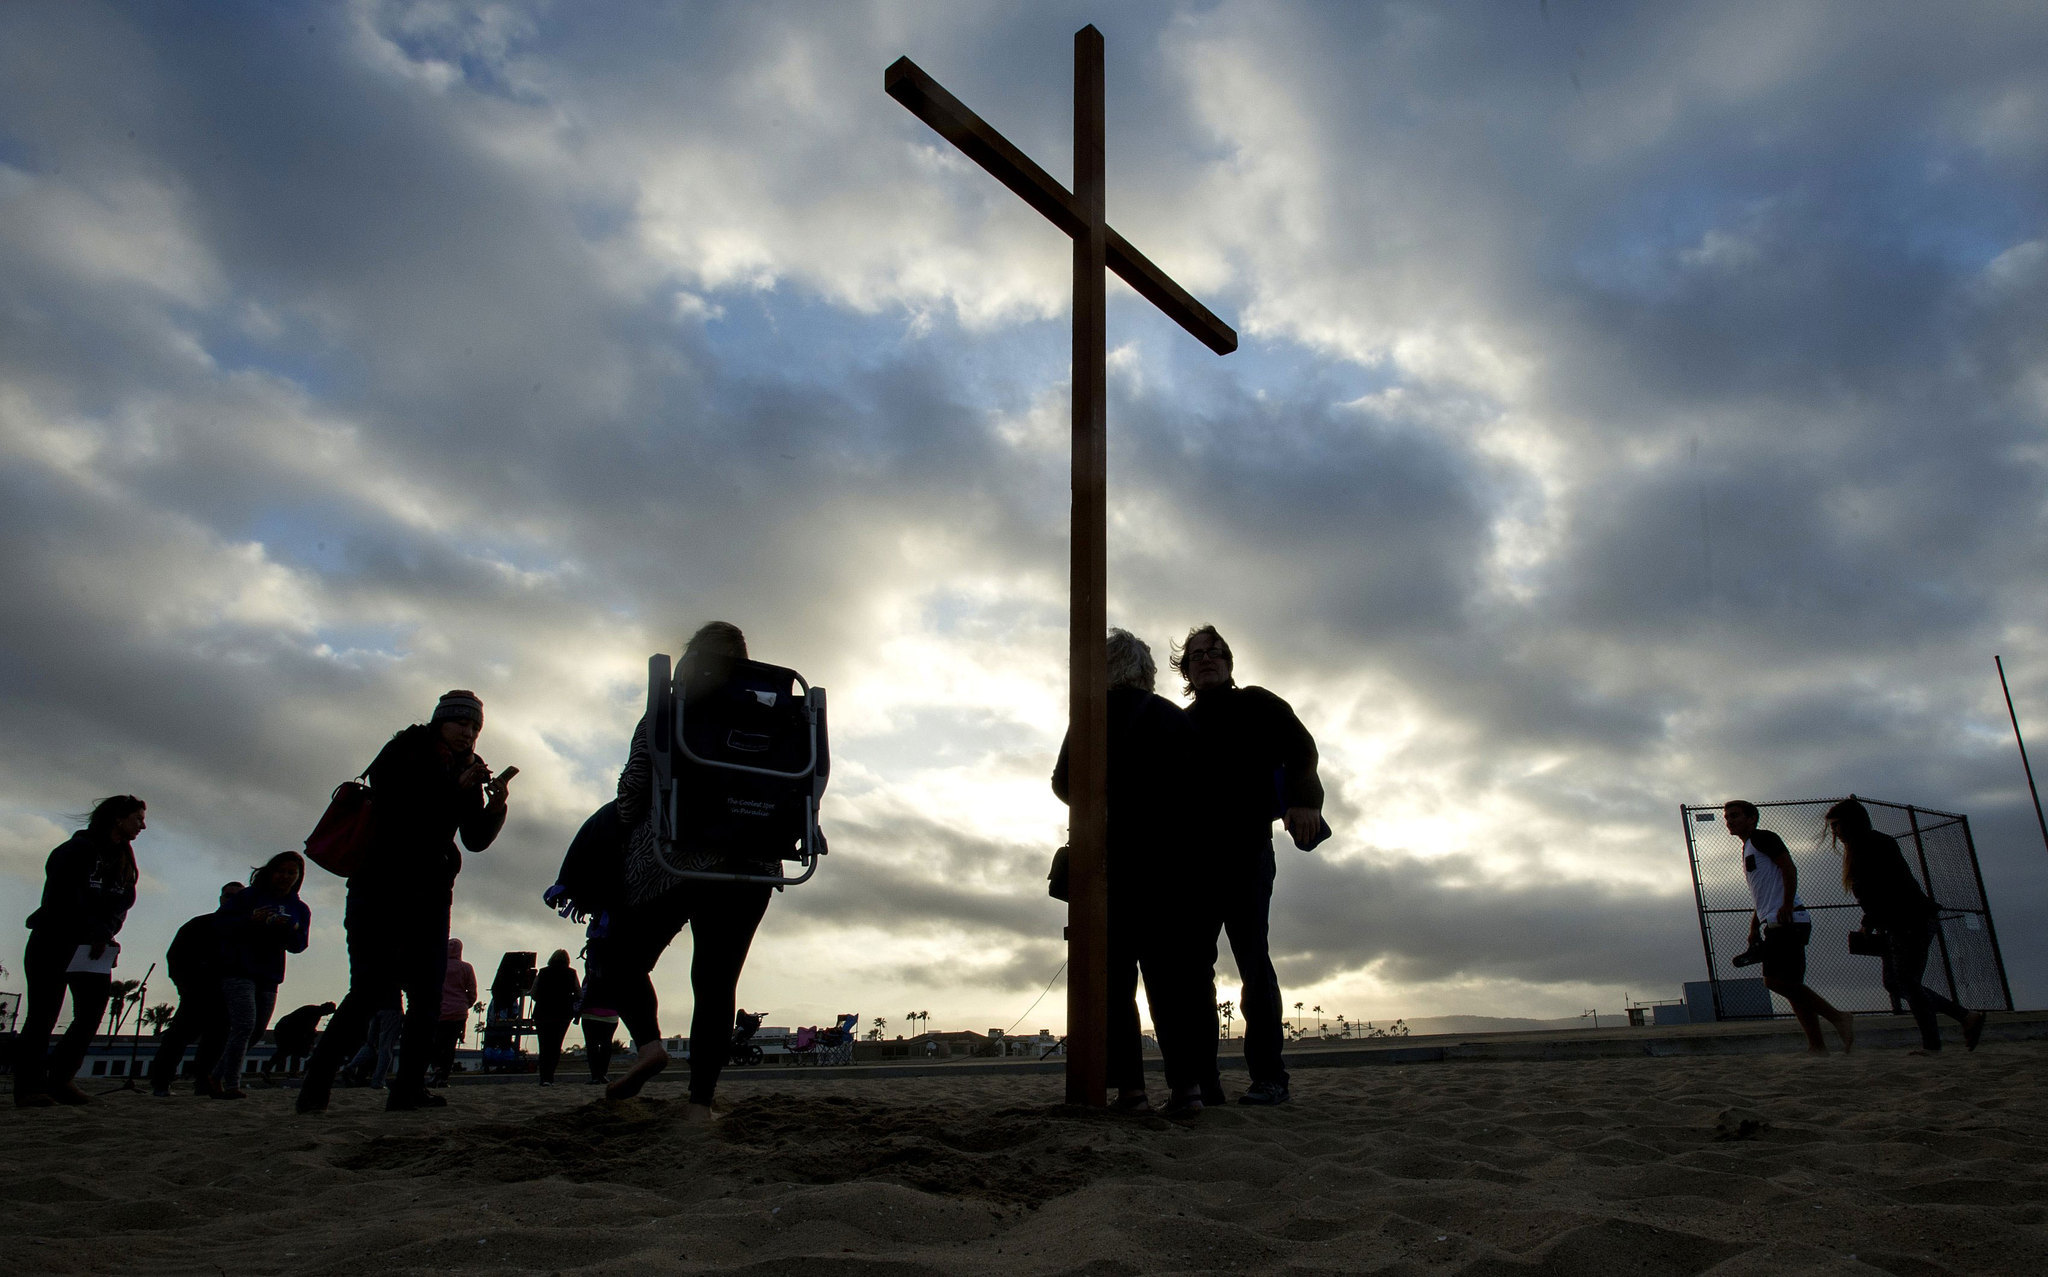 U.S. has become notably less Christian, major study finds - LA Times